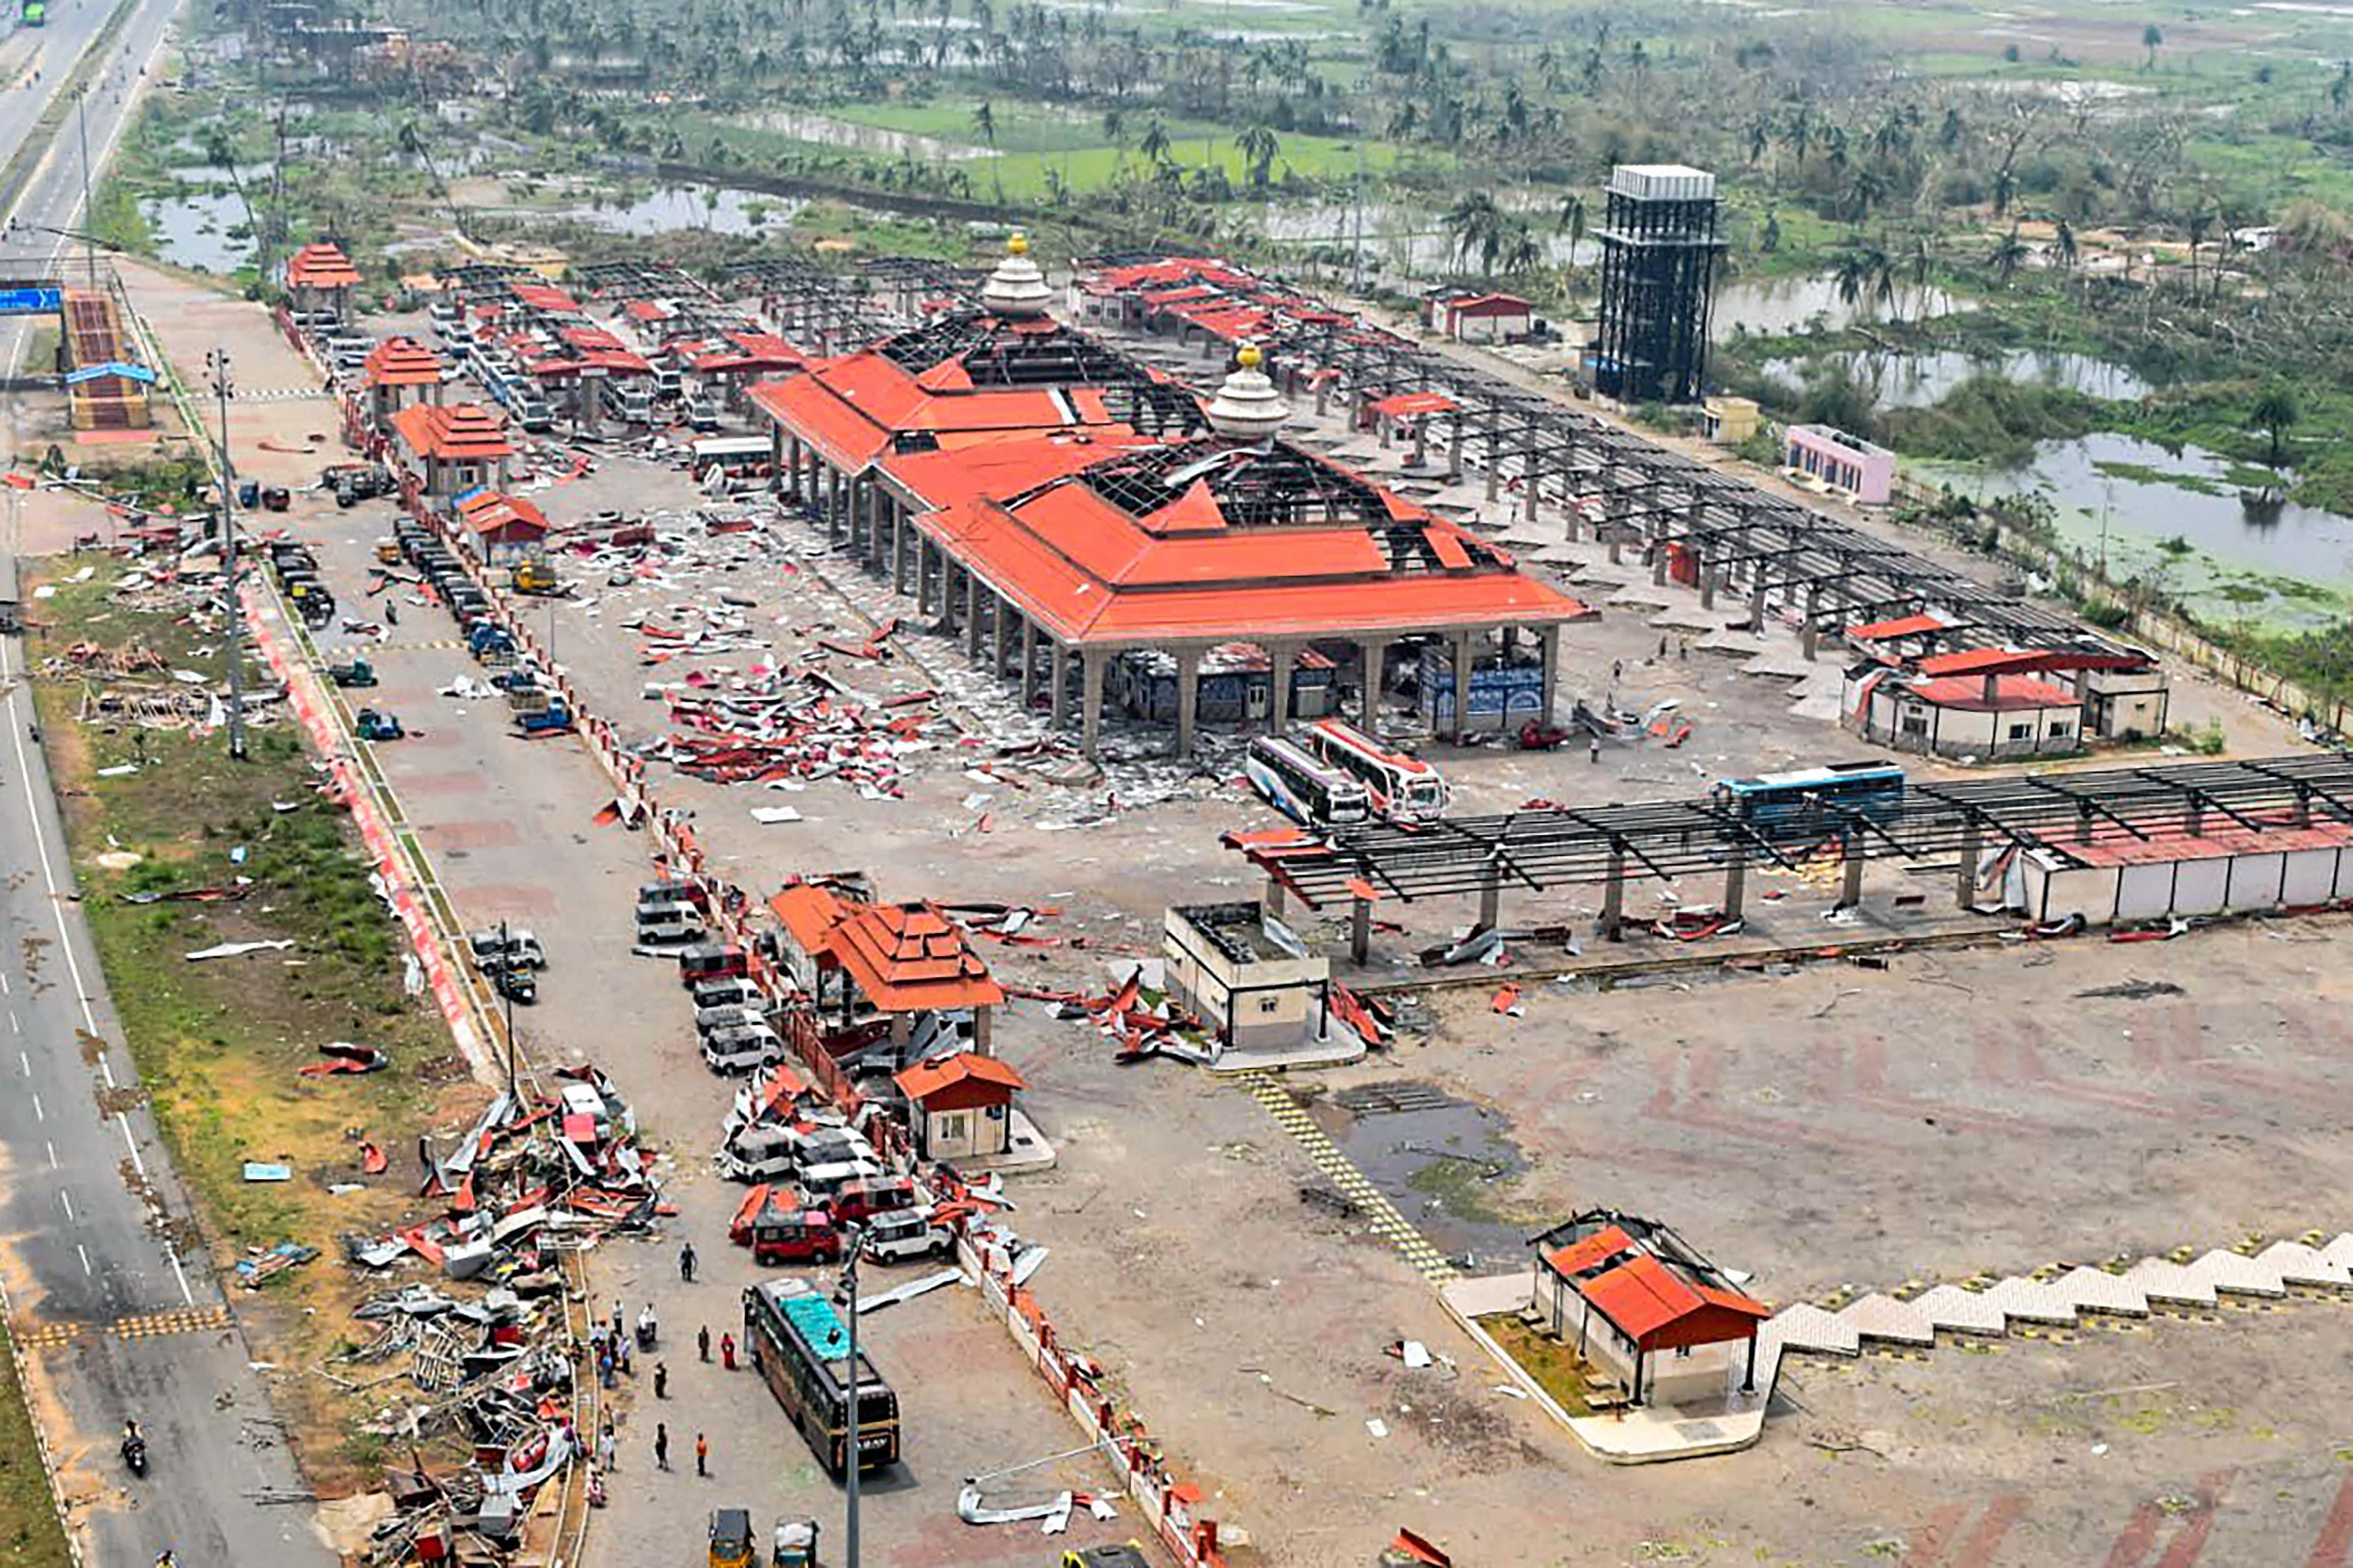 A bird’s eye view of the destruction caused by Cyclone Fani, taken during aeriel surveillance by the coast guard's Dornier aircraft, shows a bus terminus near Puri.